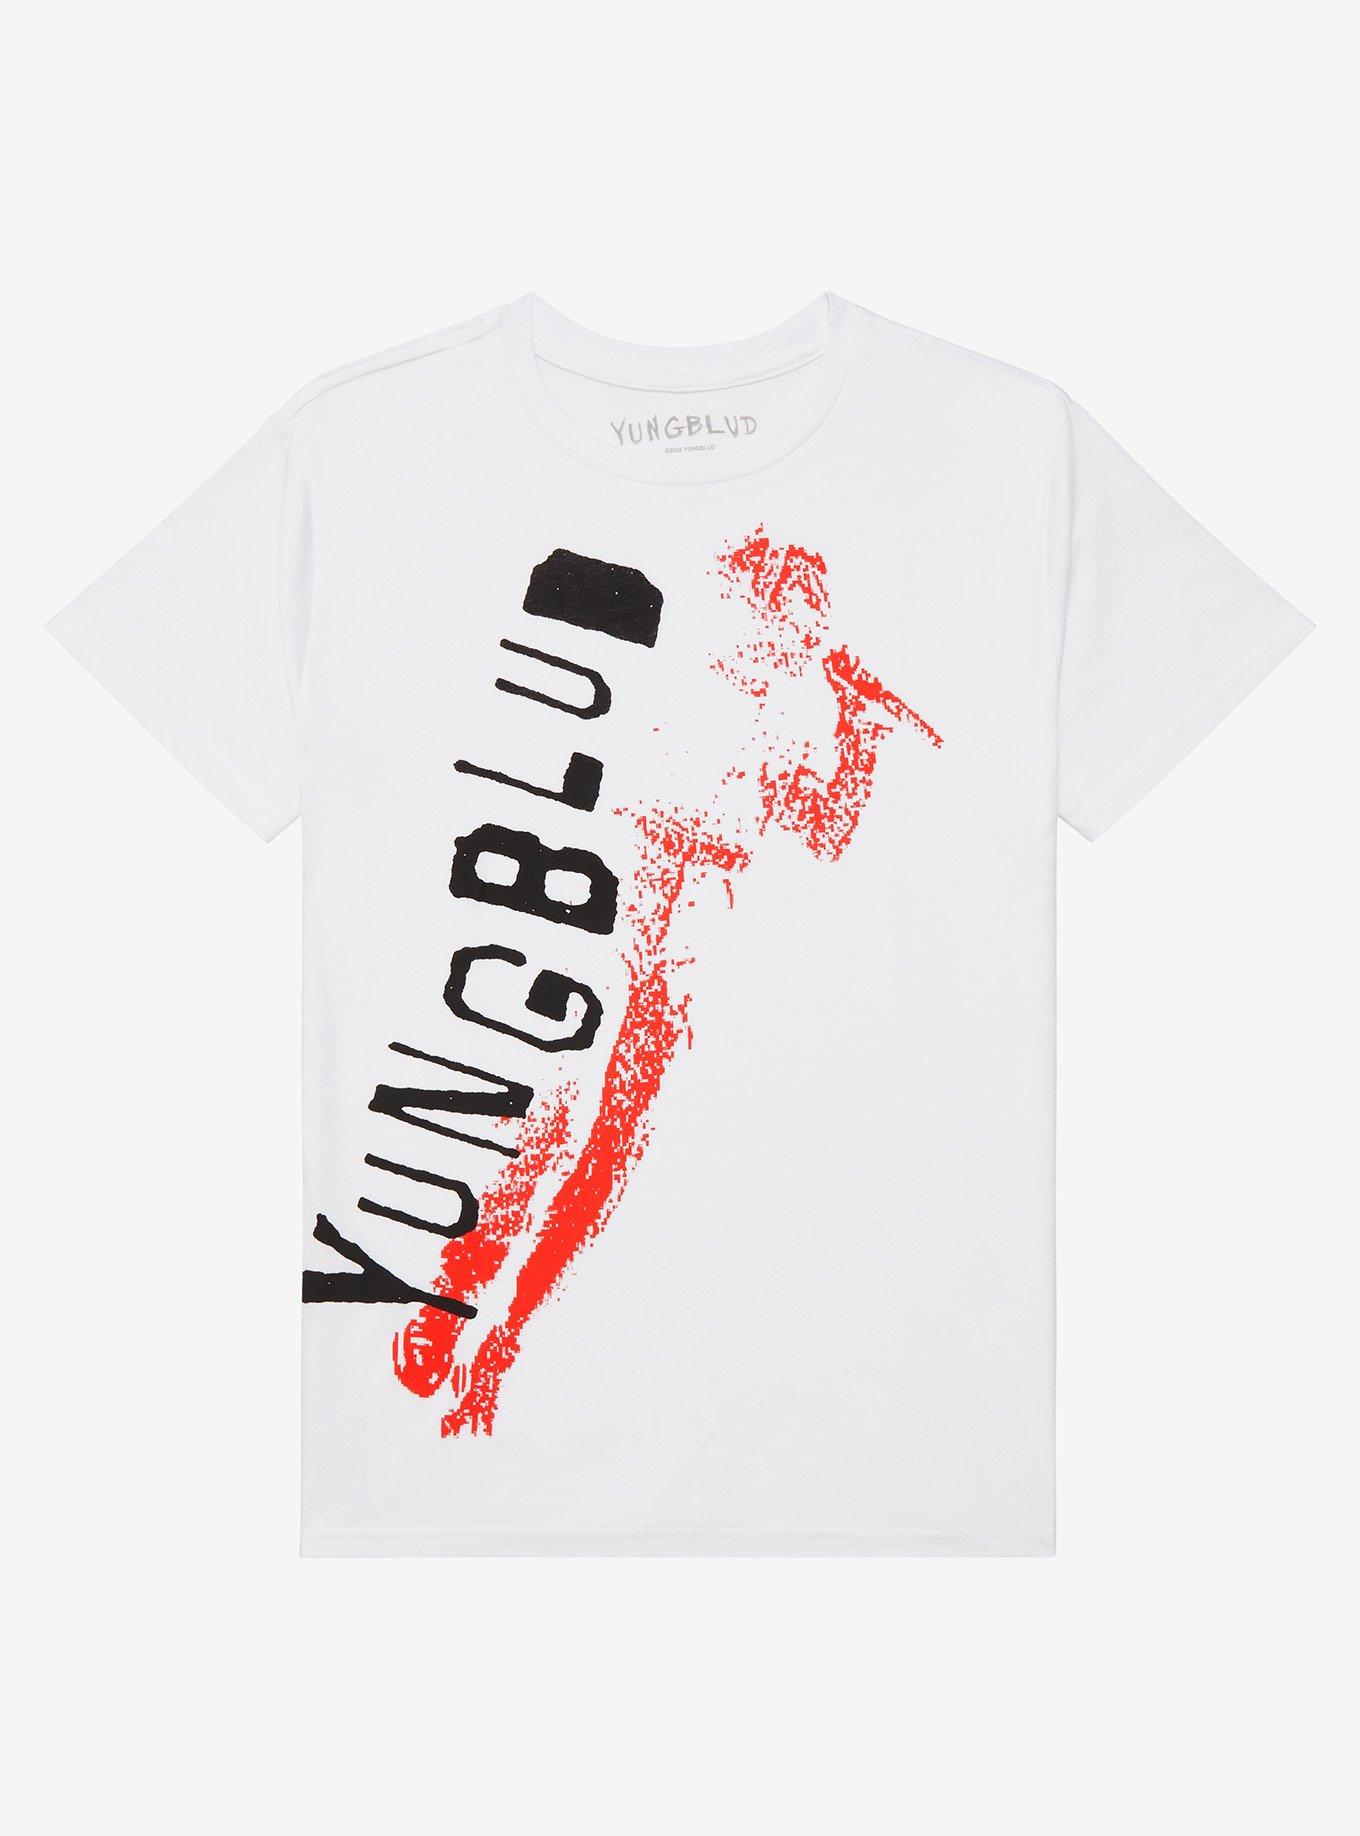 OFFICIAL Yungblud Shirts & Merchandise | Hot Topic